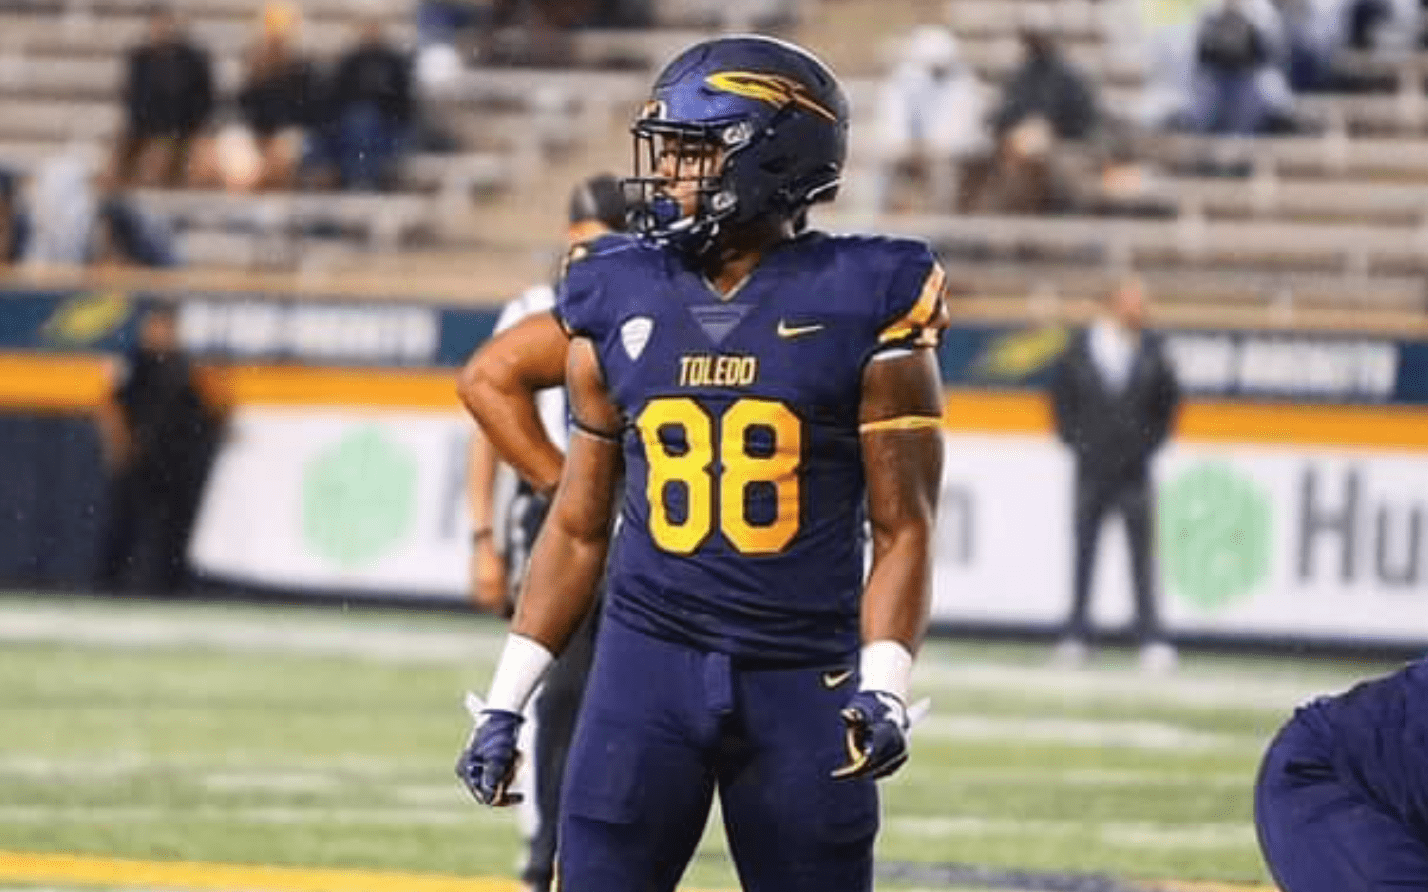 AJ Harrison the standout tight end from The University of Toledo recently sat down with Justin Berendzen of Draft Diamonds